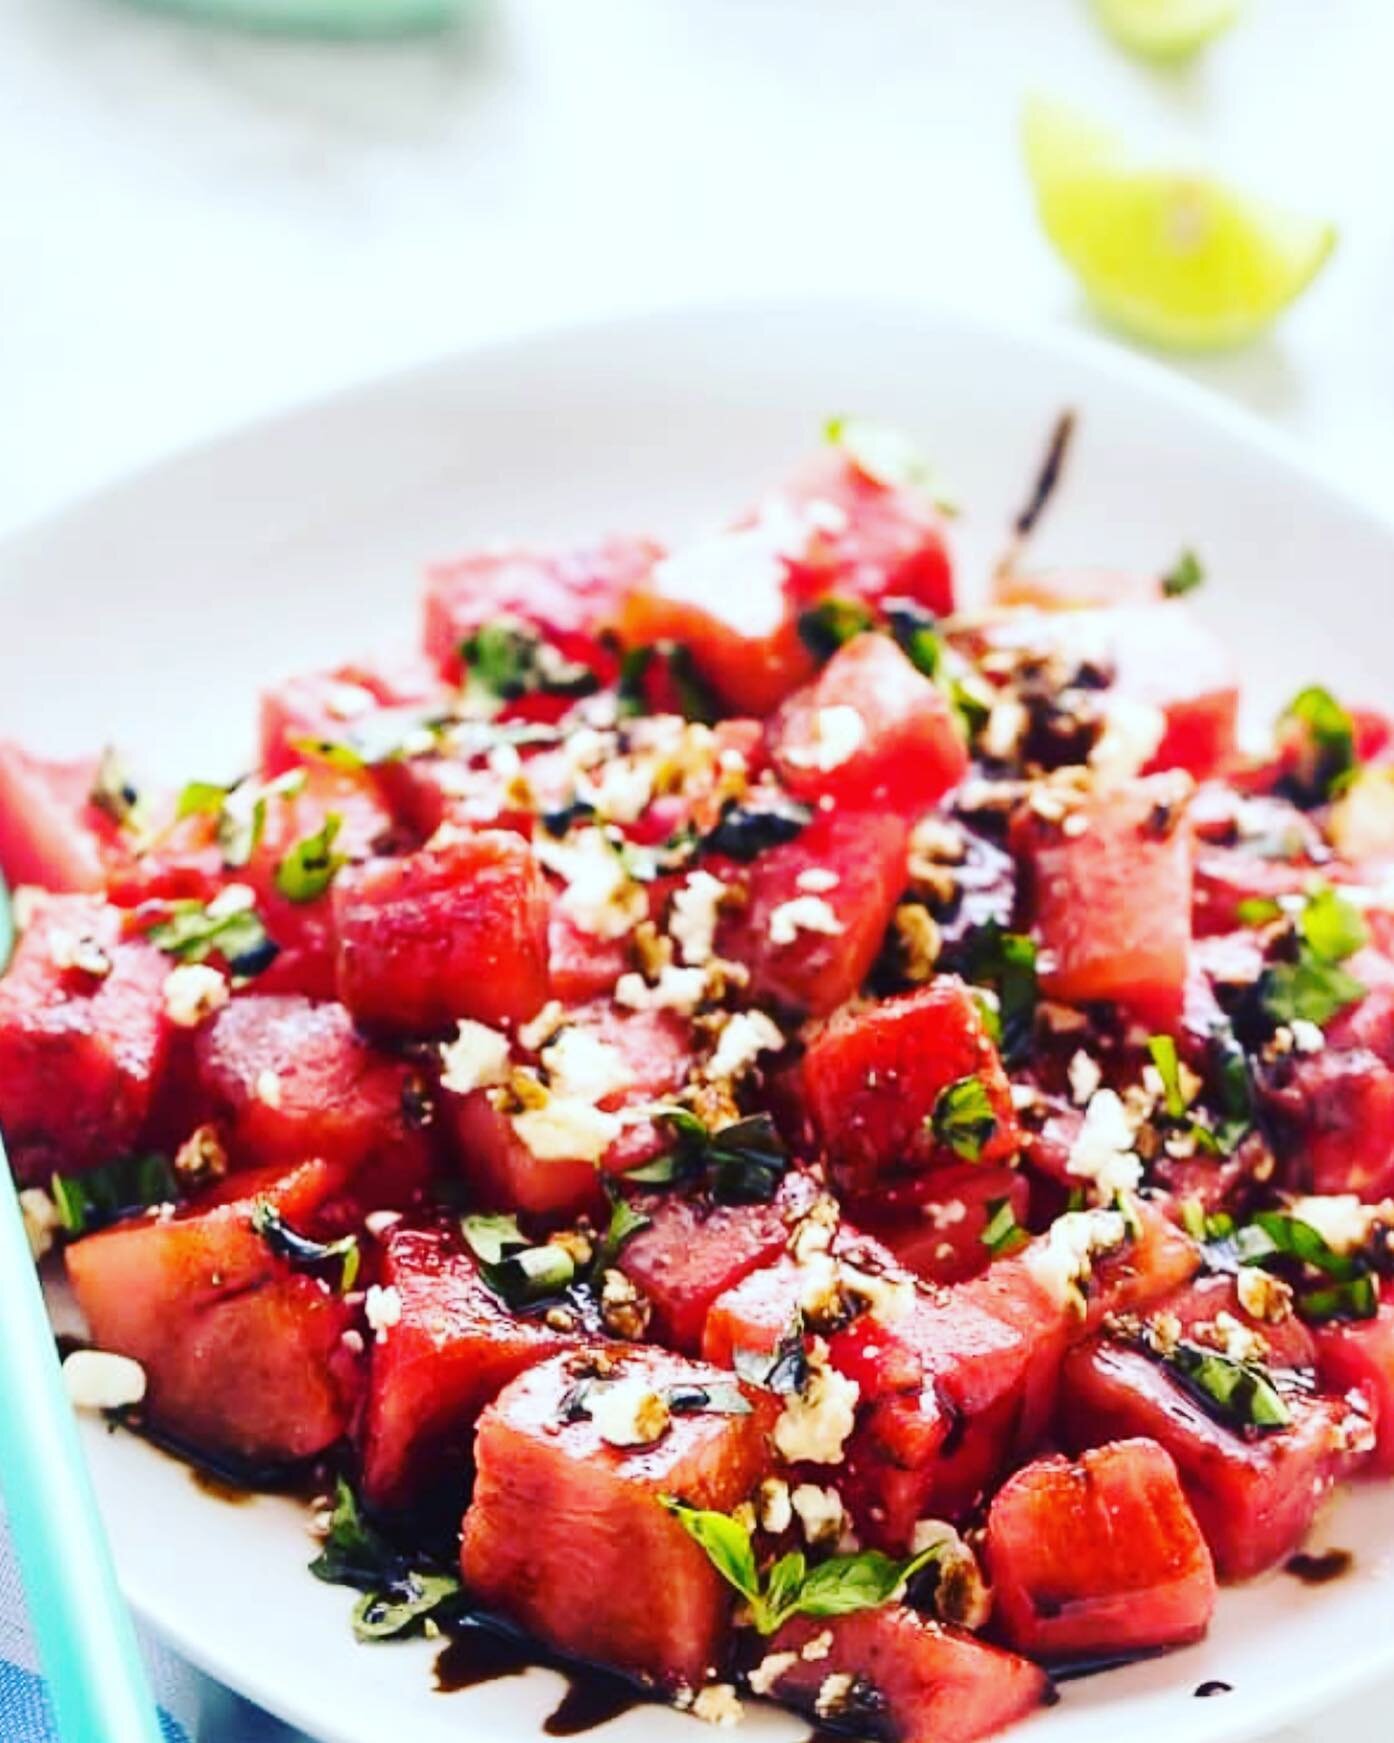 It&rsquo;s summertime here at Melt &amp; we are featuring a seasonal Watermelon Salad! Fresh seedless watermelon, feta cheese, mint, red onion, chopped candy pecans over mixed greens topped with our house-made balsamic reduction with raspberry vinaig